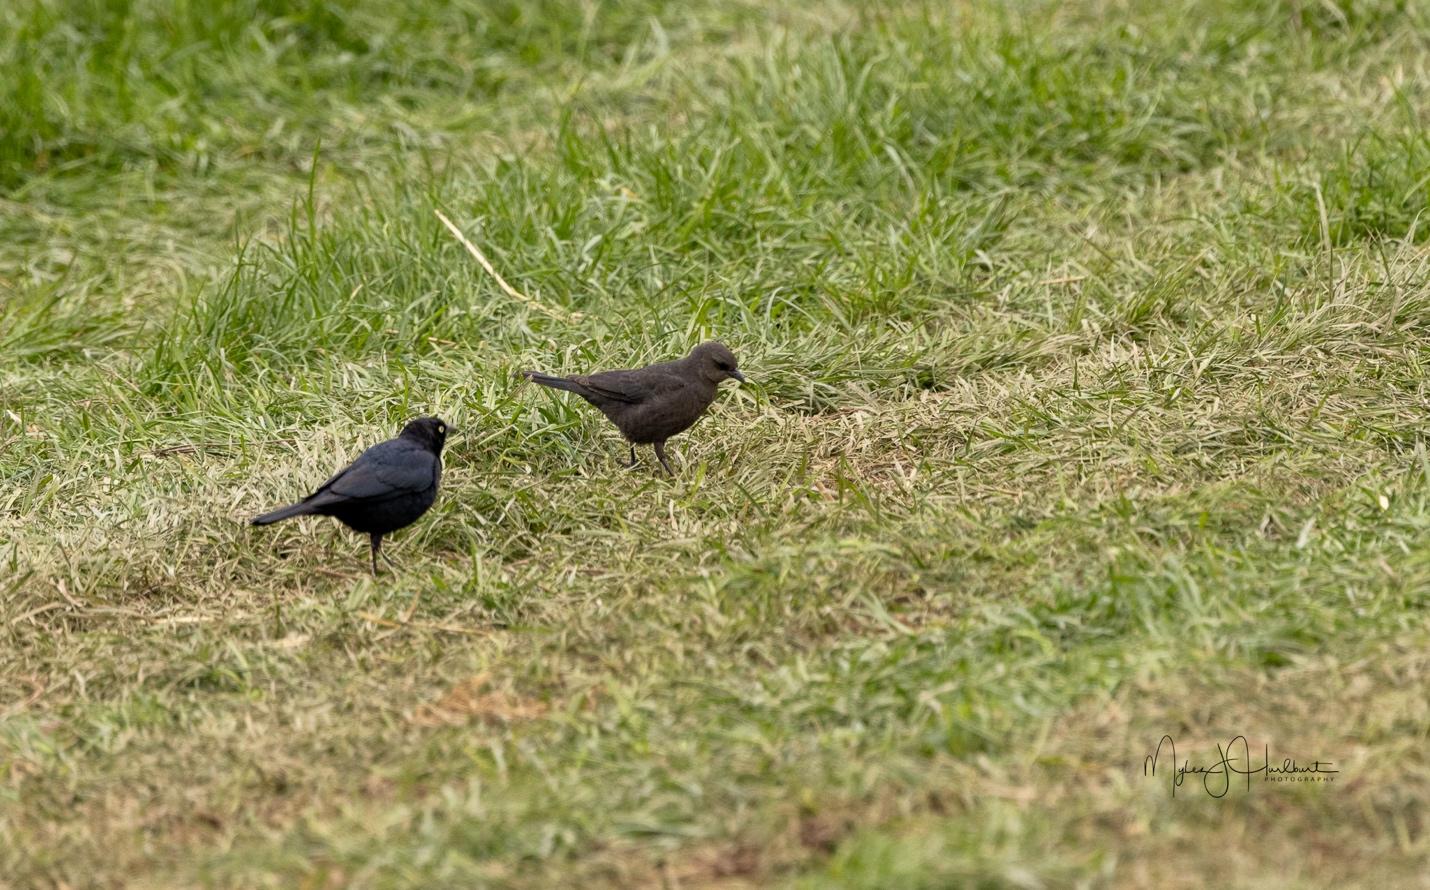 A couple of birds on grass

Description automatically generated